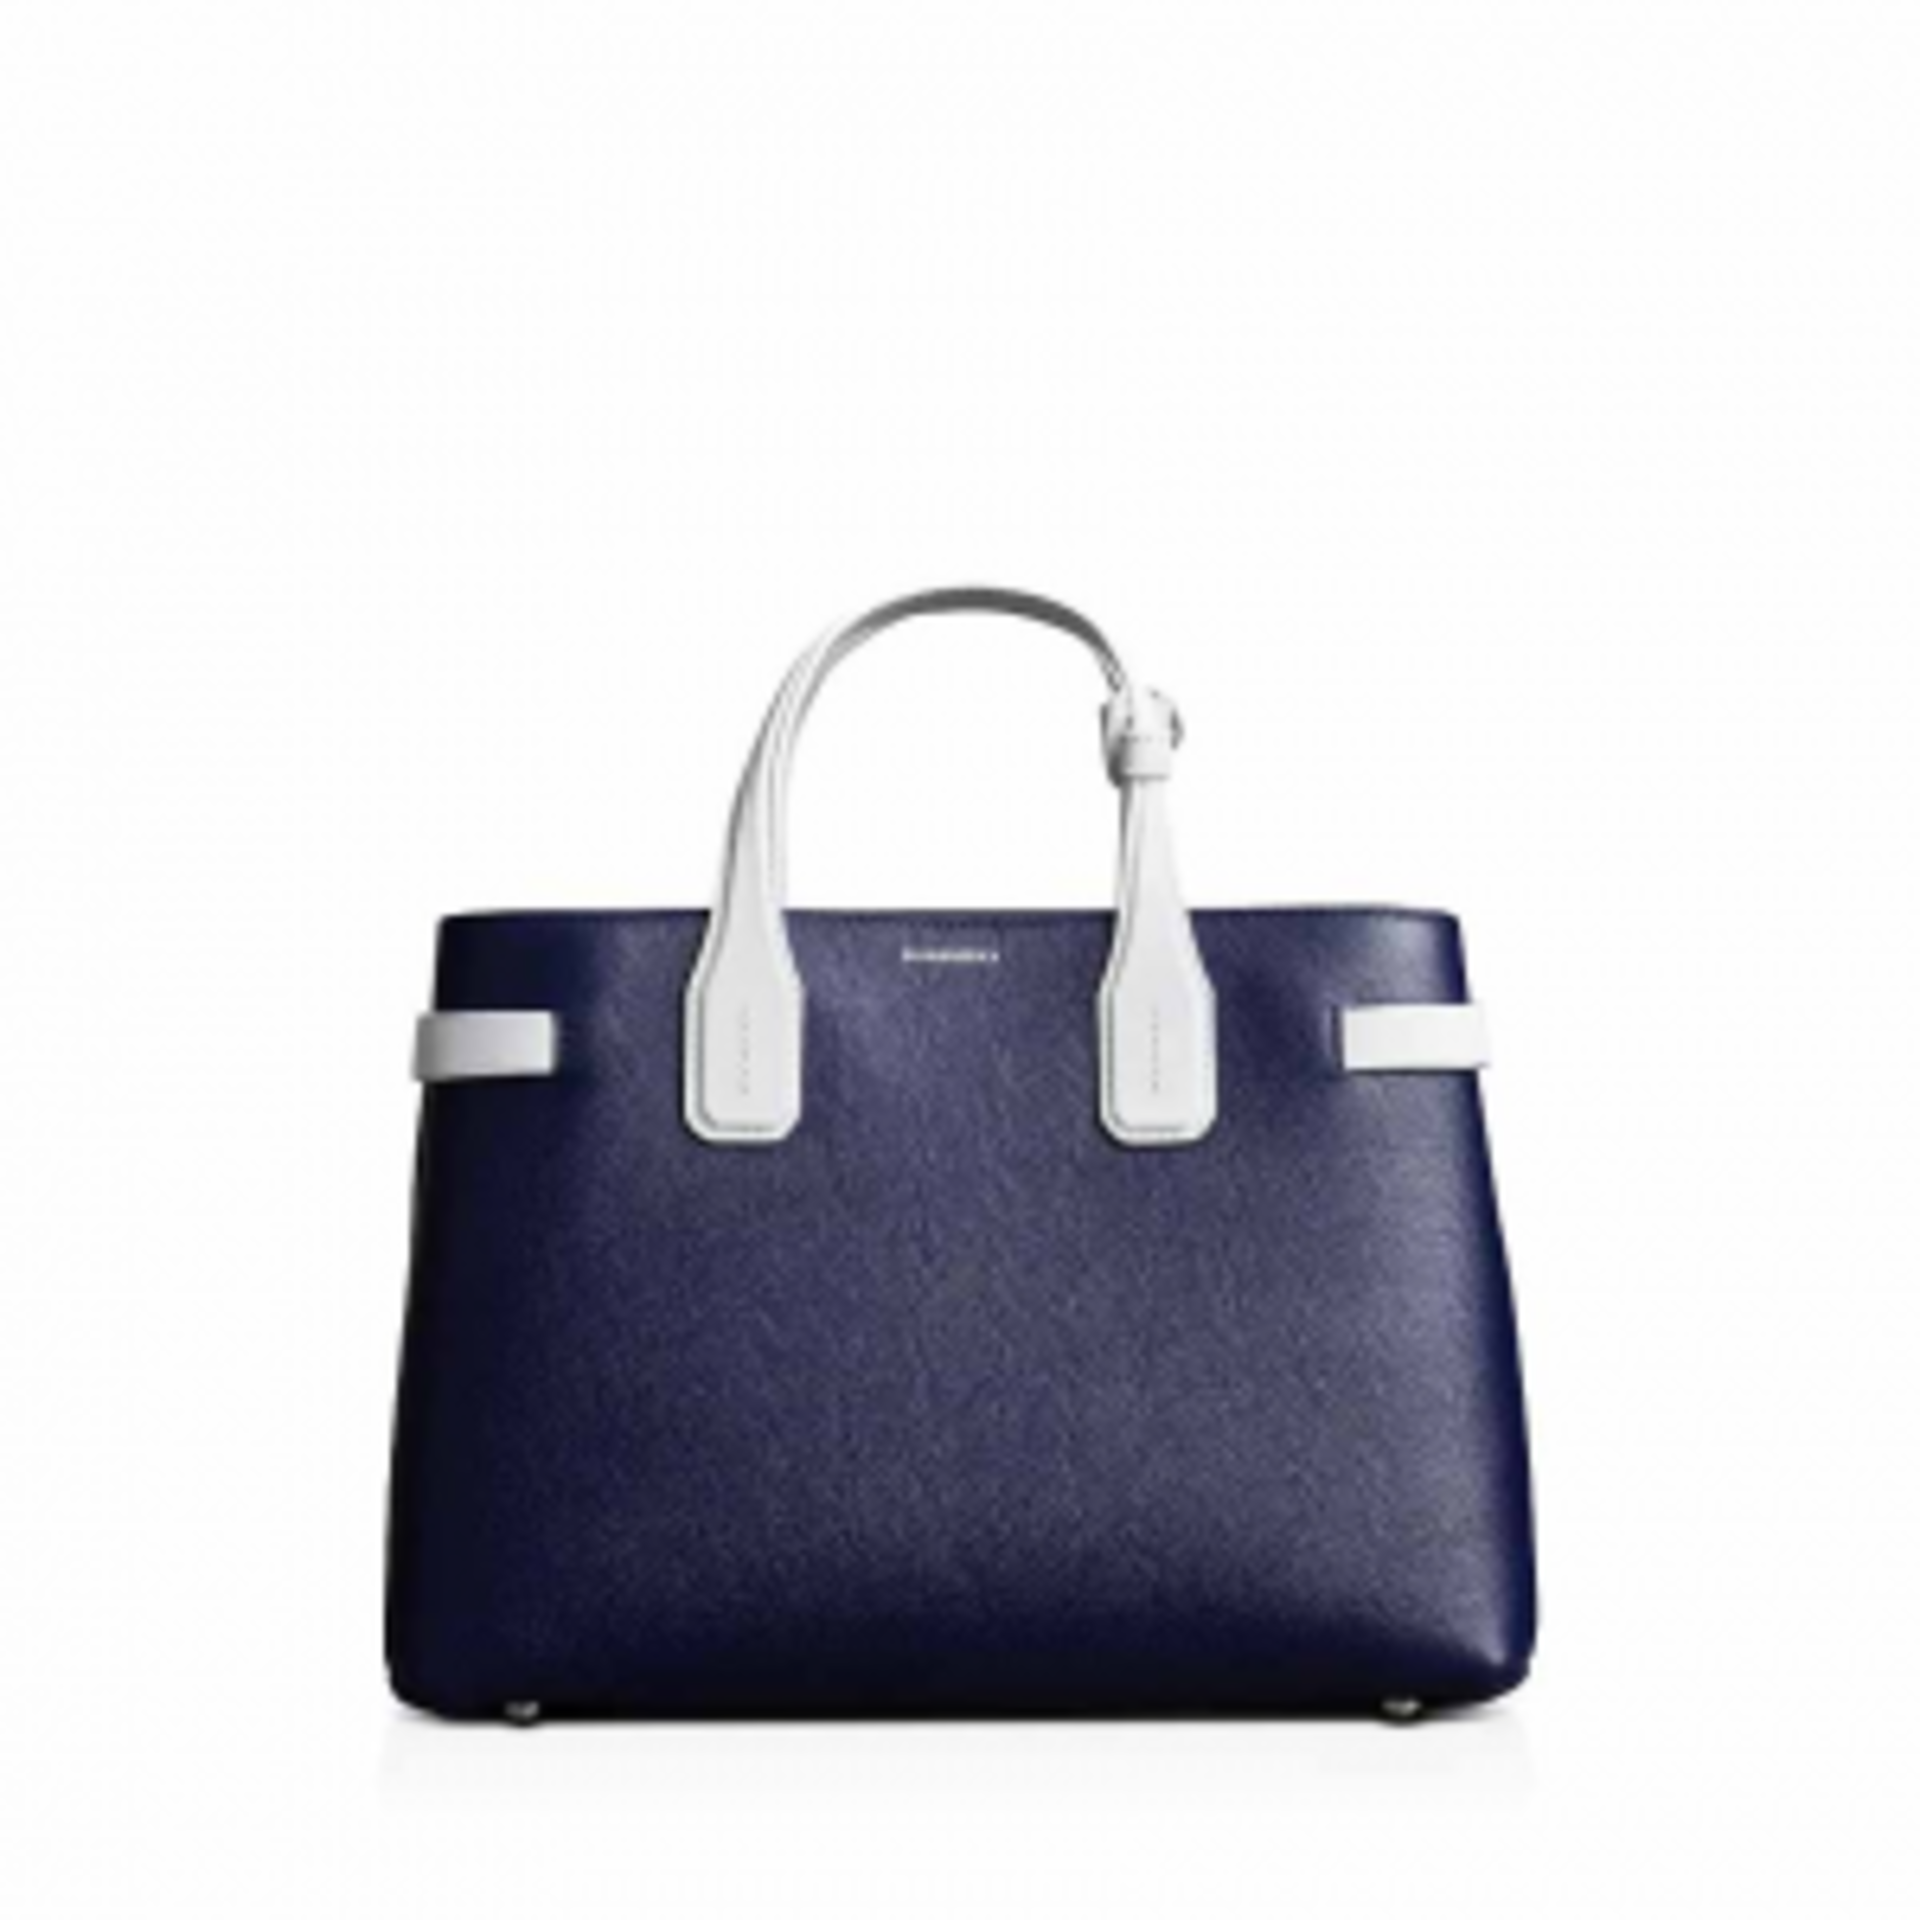 Genuine Burberry Navy Tote with White detail. Strap included. RRP £1,484.00.